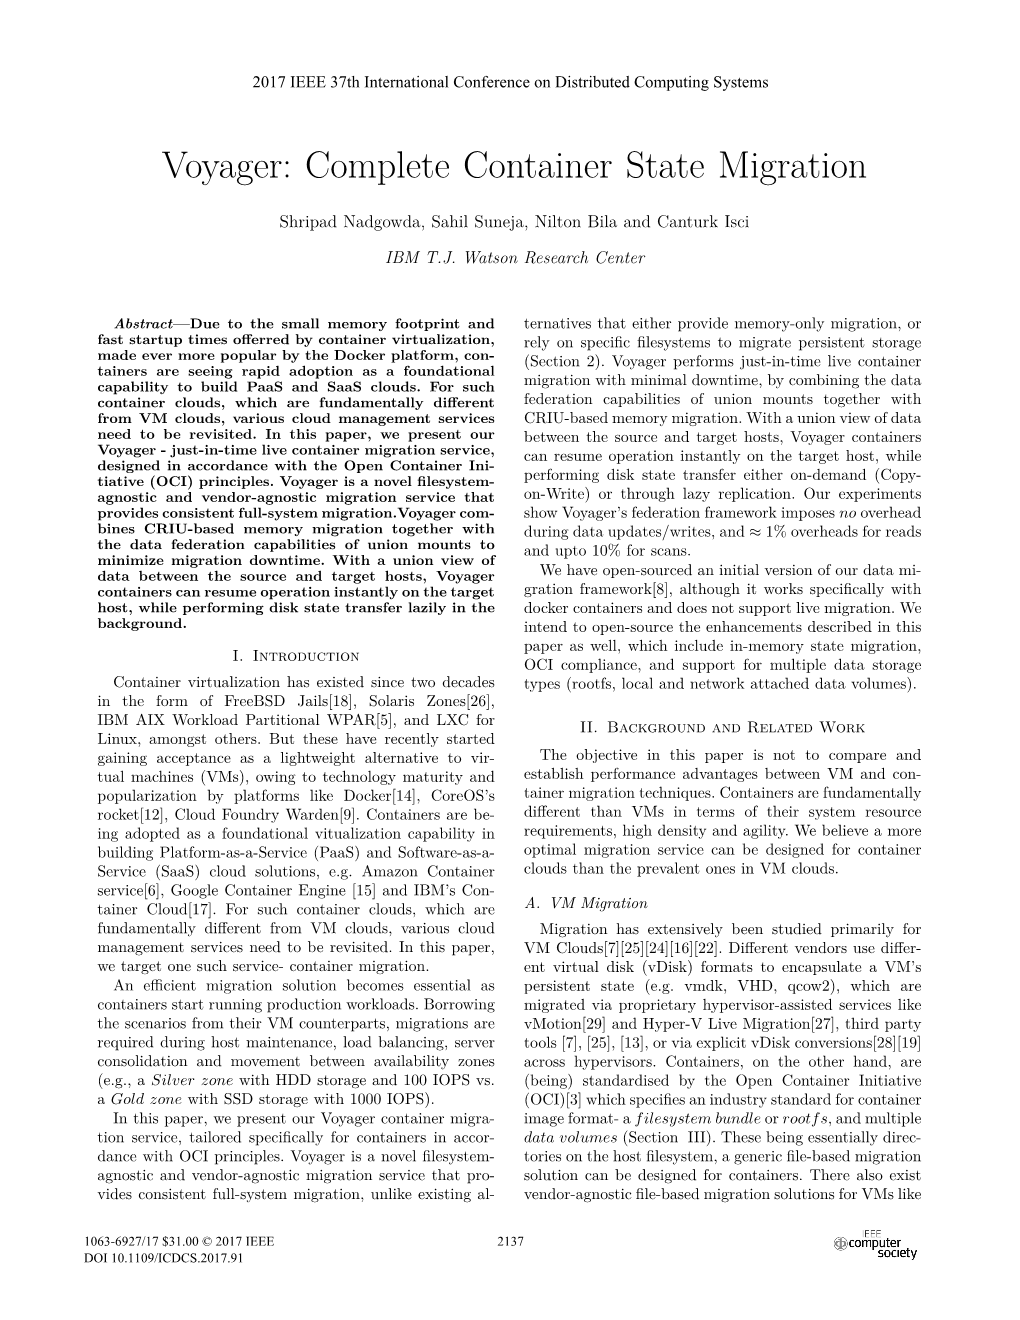 Voyager: Complete Container State Migration